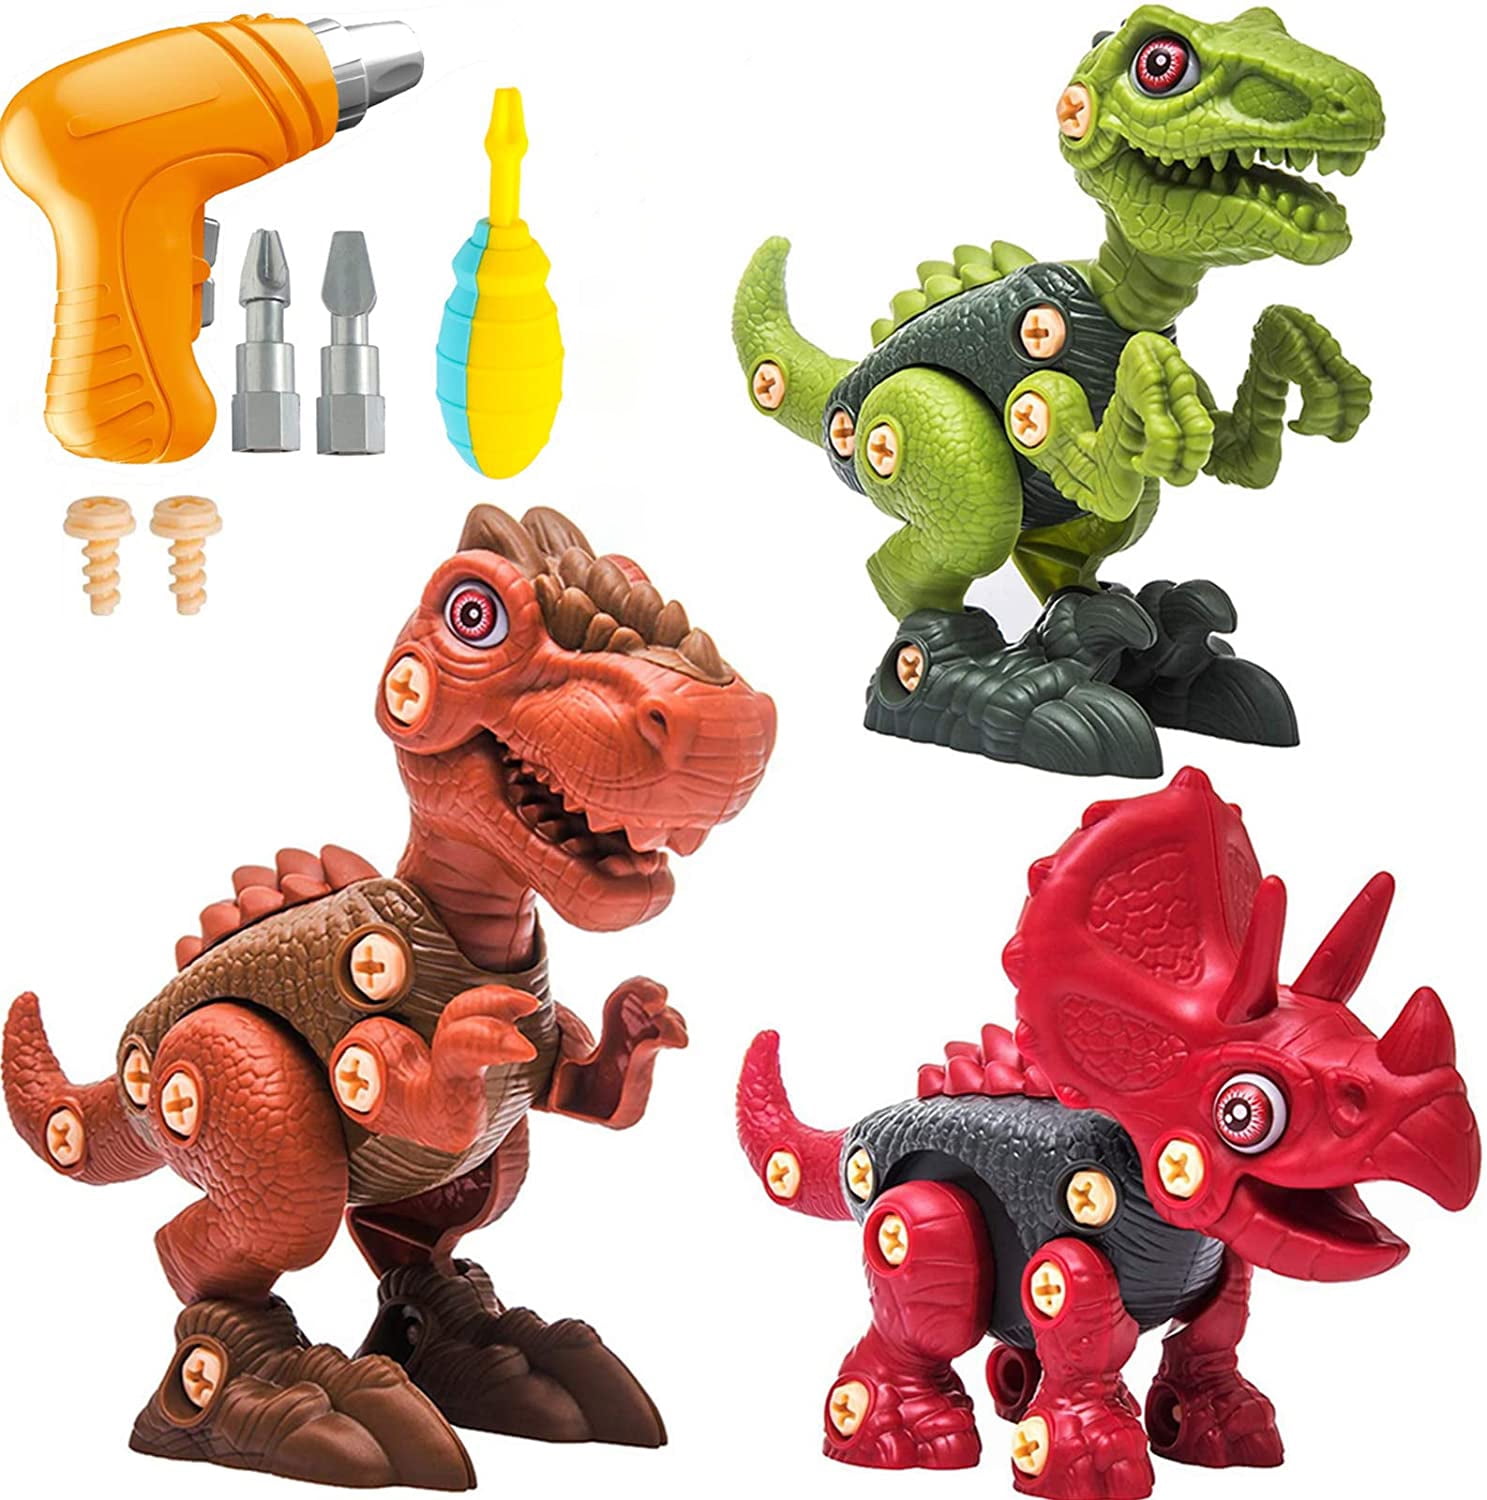 Dinosaur Toys 3-6 Year Old Boy Gifts ATOPDREAM Toys for 2 3 4 5 6 Year Old Boys 